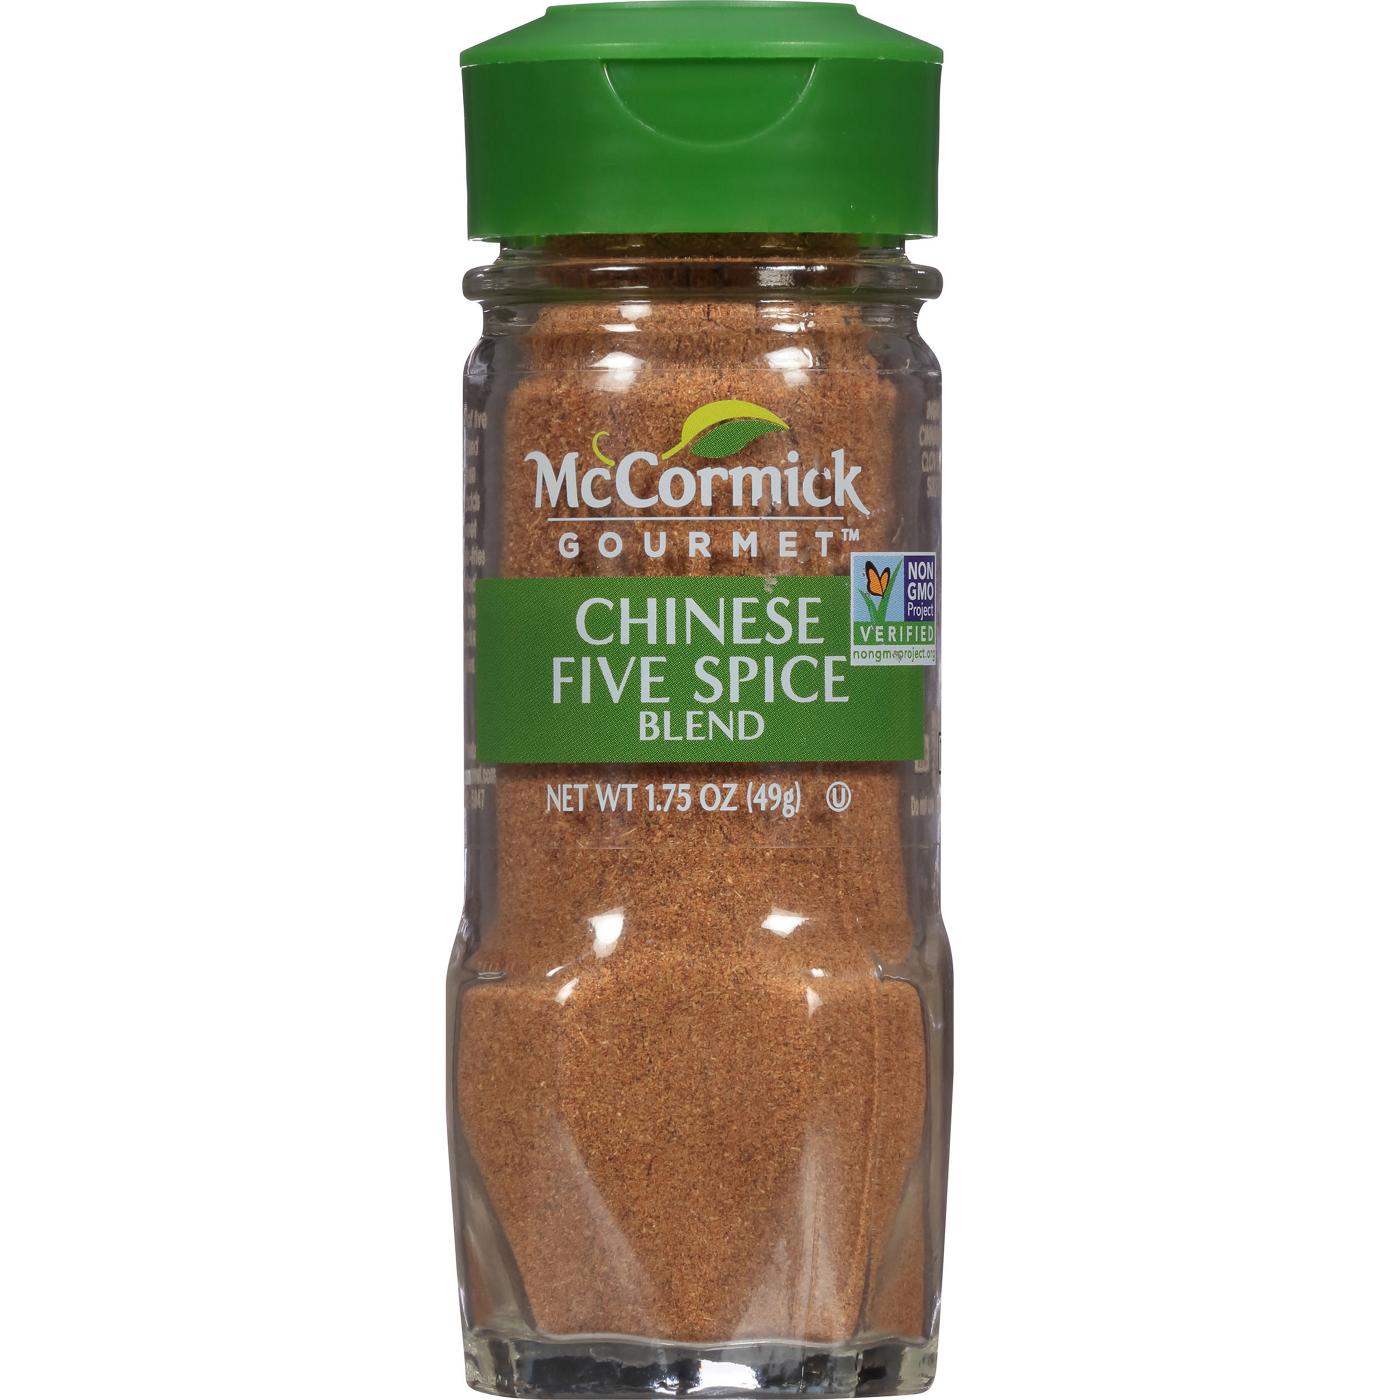 McCormick Chinese Five Spice Blend; image 1 of 3